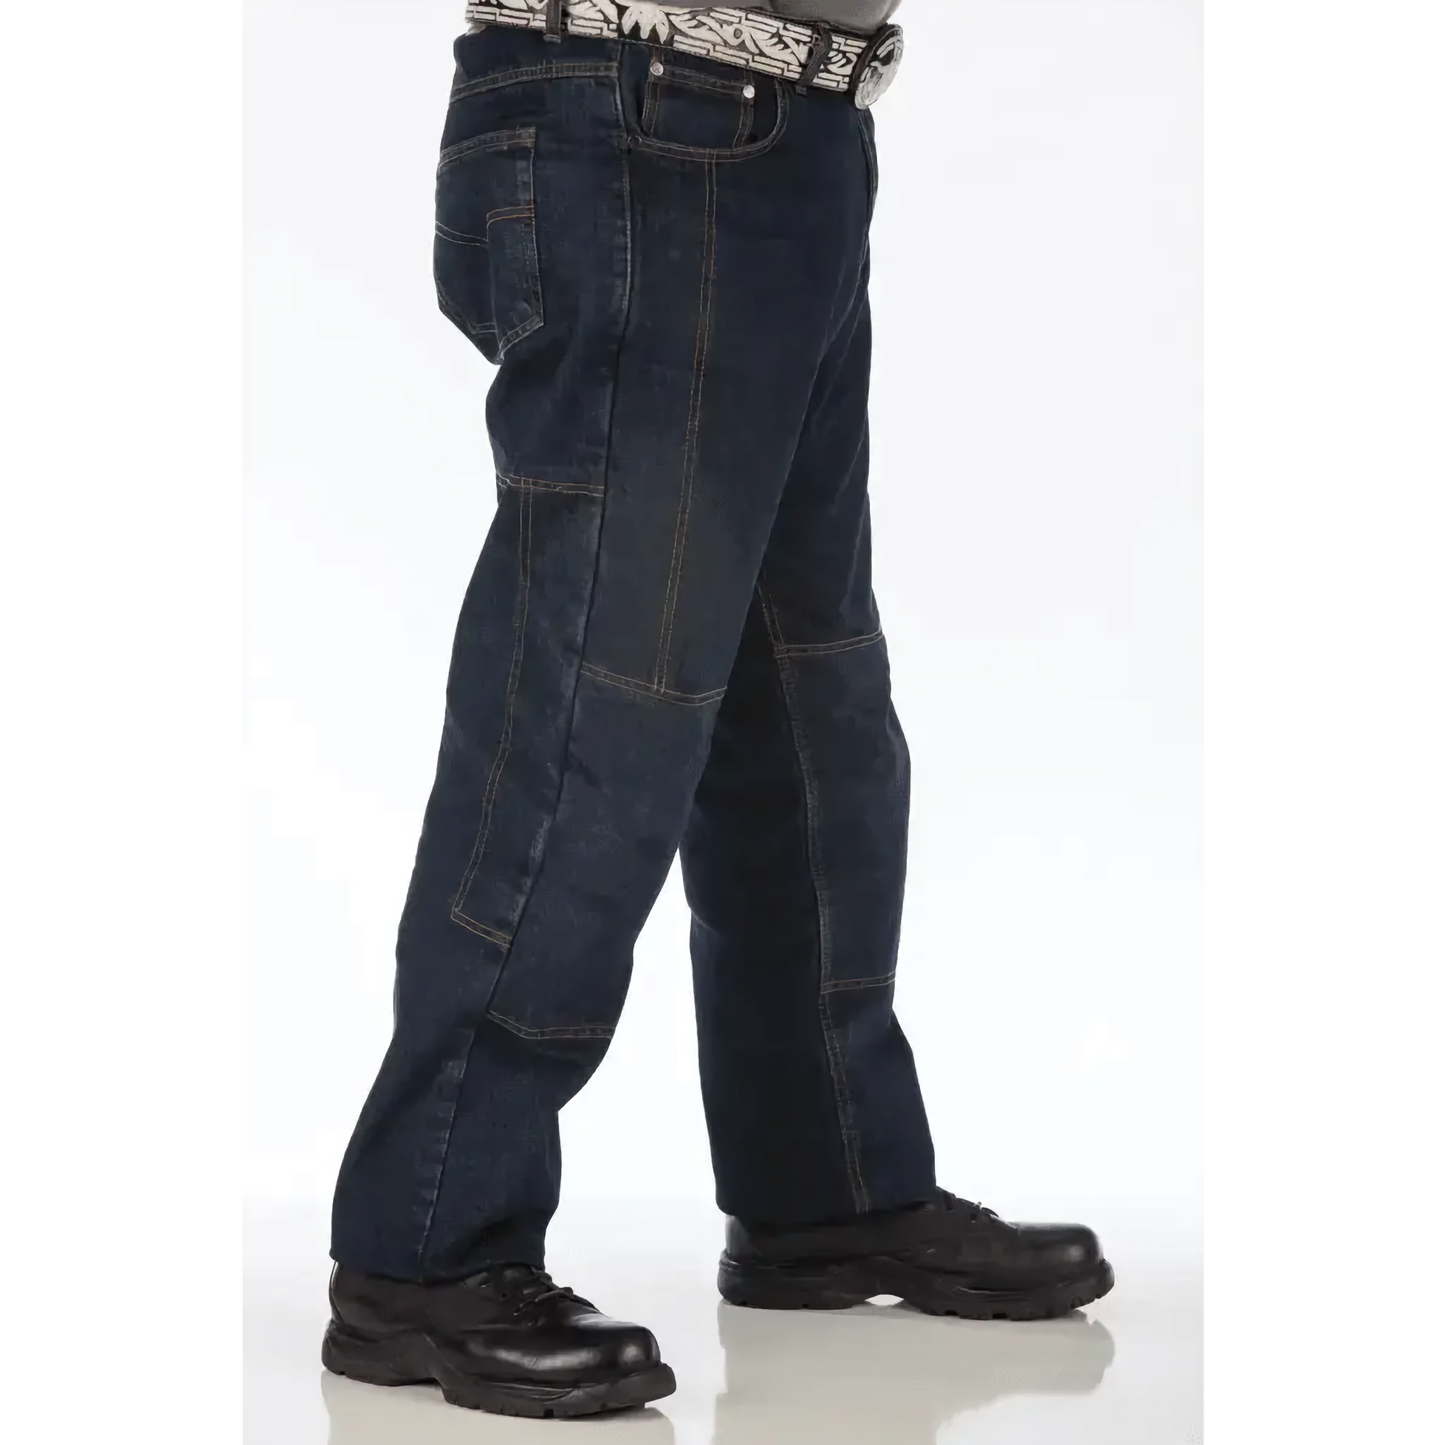 Armored Aramid-Lined Motorcycle Jeans for Men